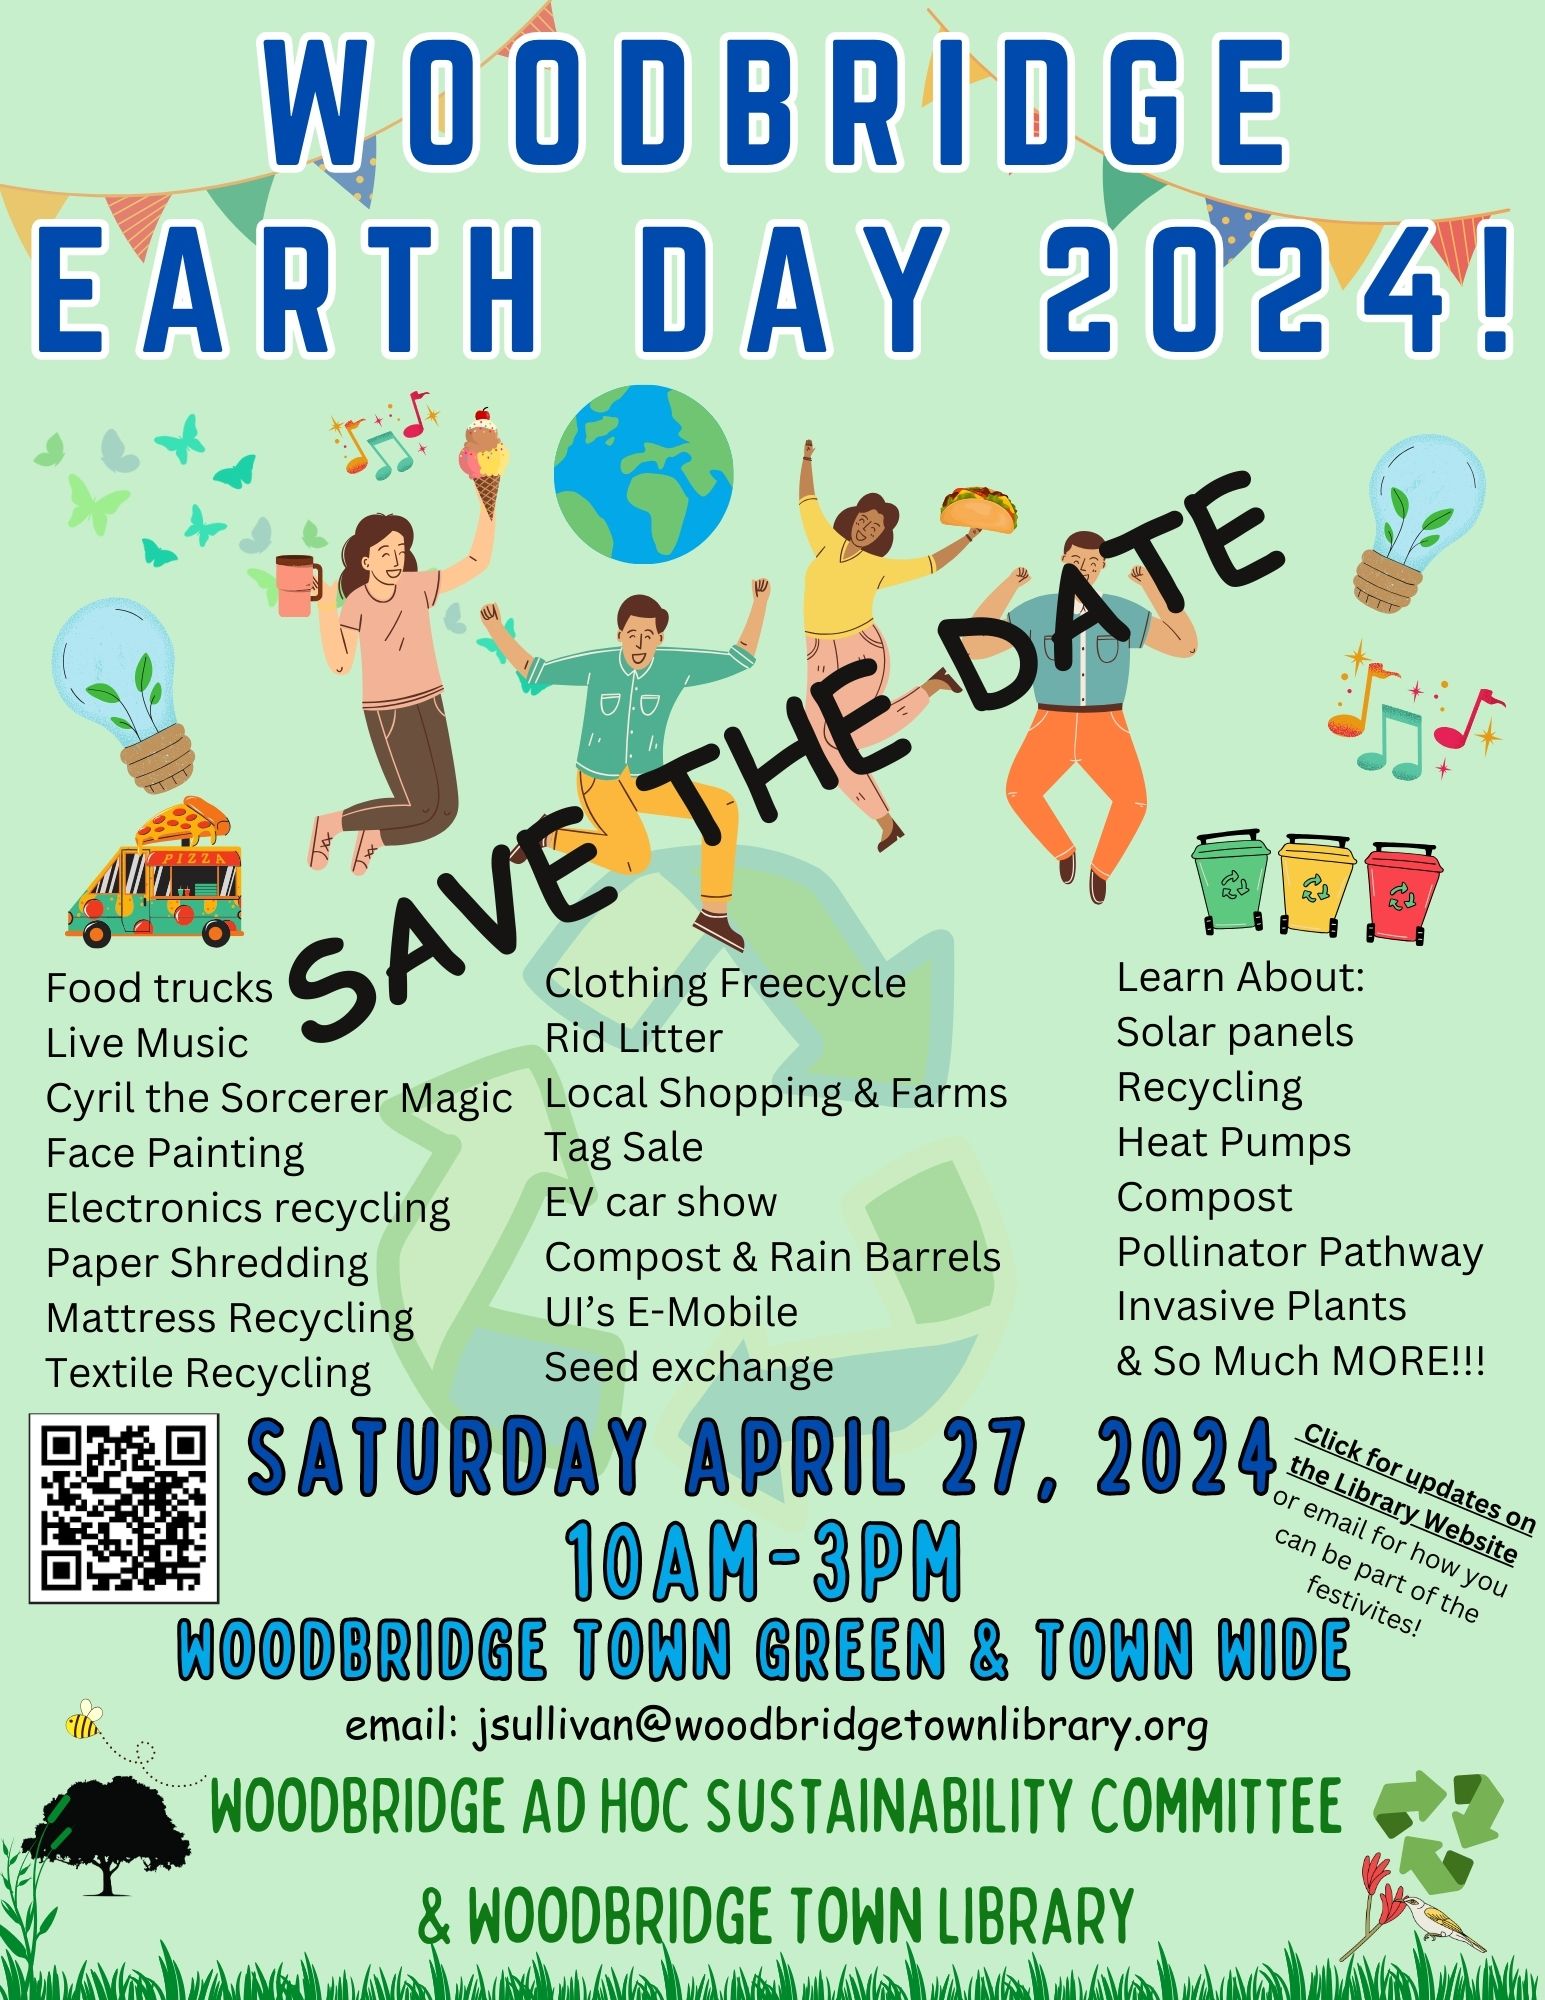 A green background with people jumping around the earth. The words SAVE THE DATE are printed over the people. Other information about the upcoming Earth Day event in Woodbridge is printed below the image.